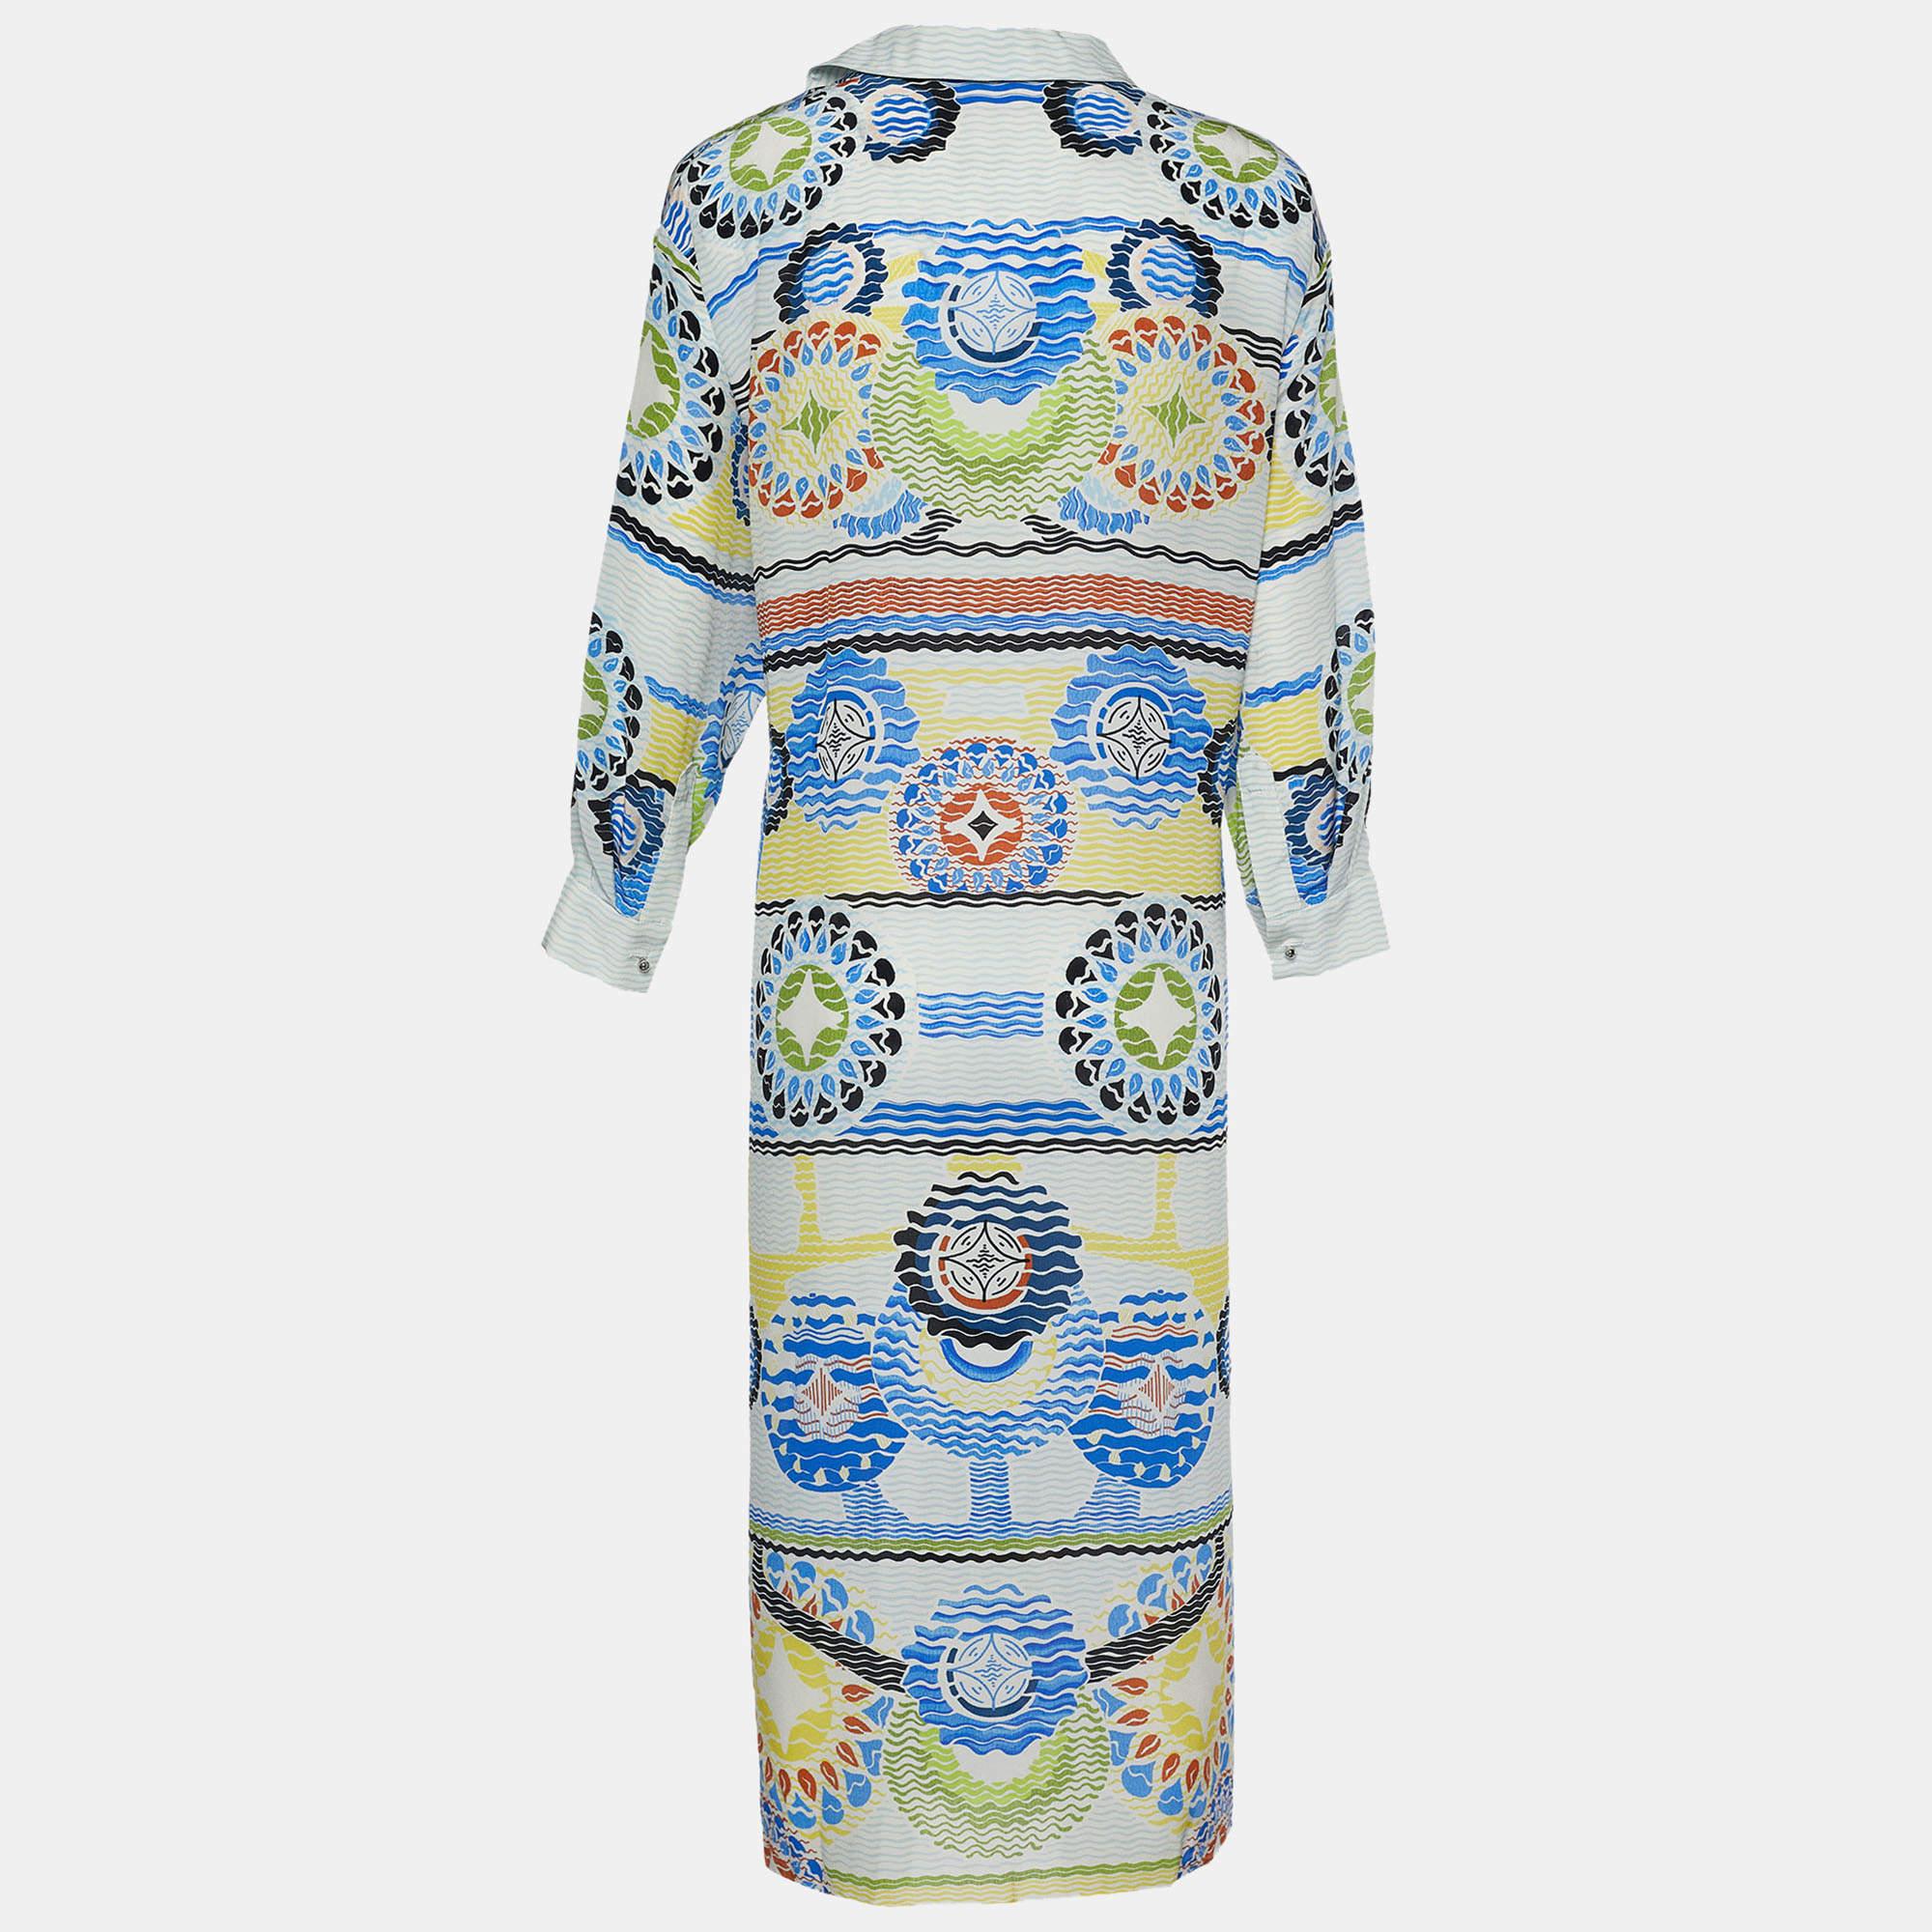 How pretty is this kaftan dress from Peter Pilotto! Tailored using multicolored silk fabric, this dress flaunts a digital abstract print throughout with long sleeves, collars, and buttoned closures. This Peter Pilotto creation is the perfect pick